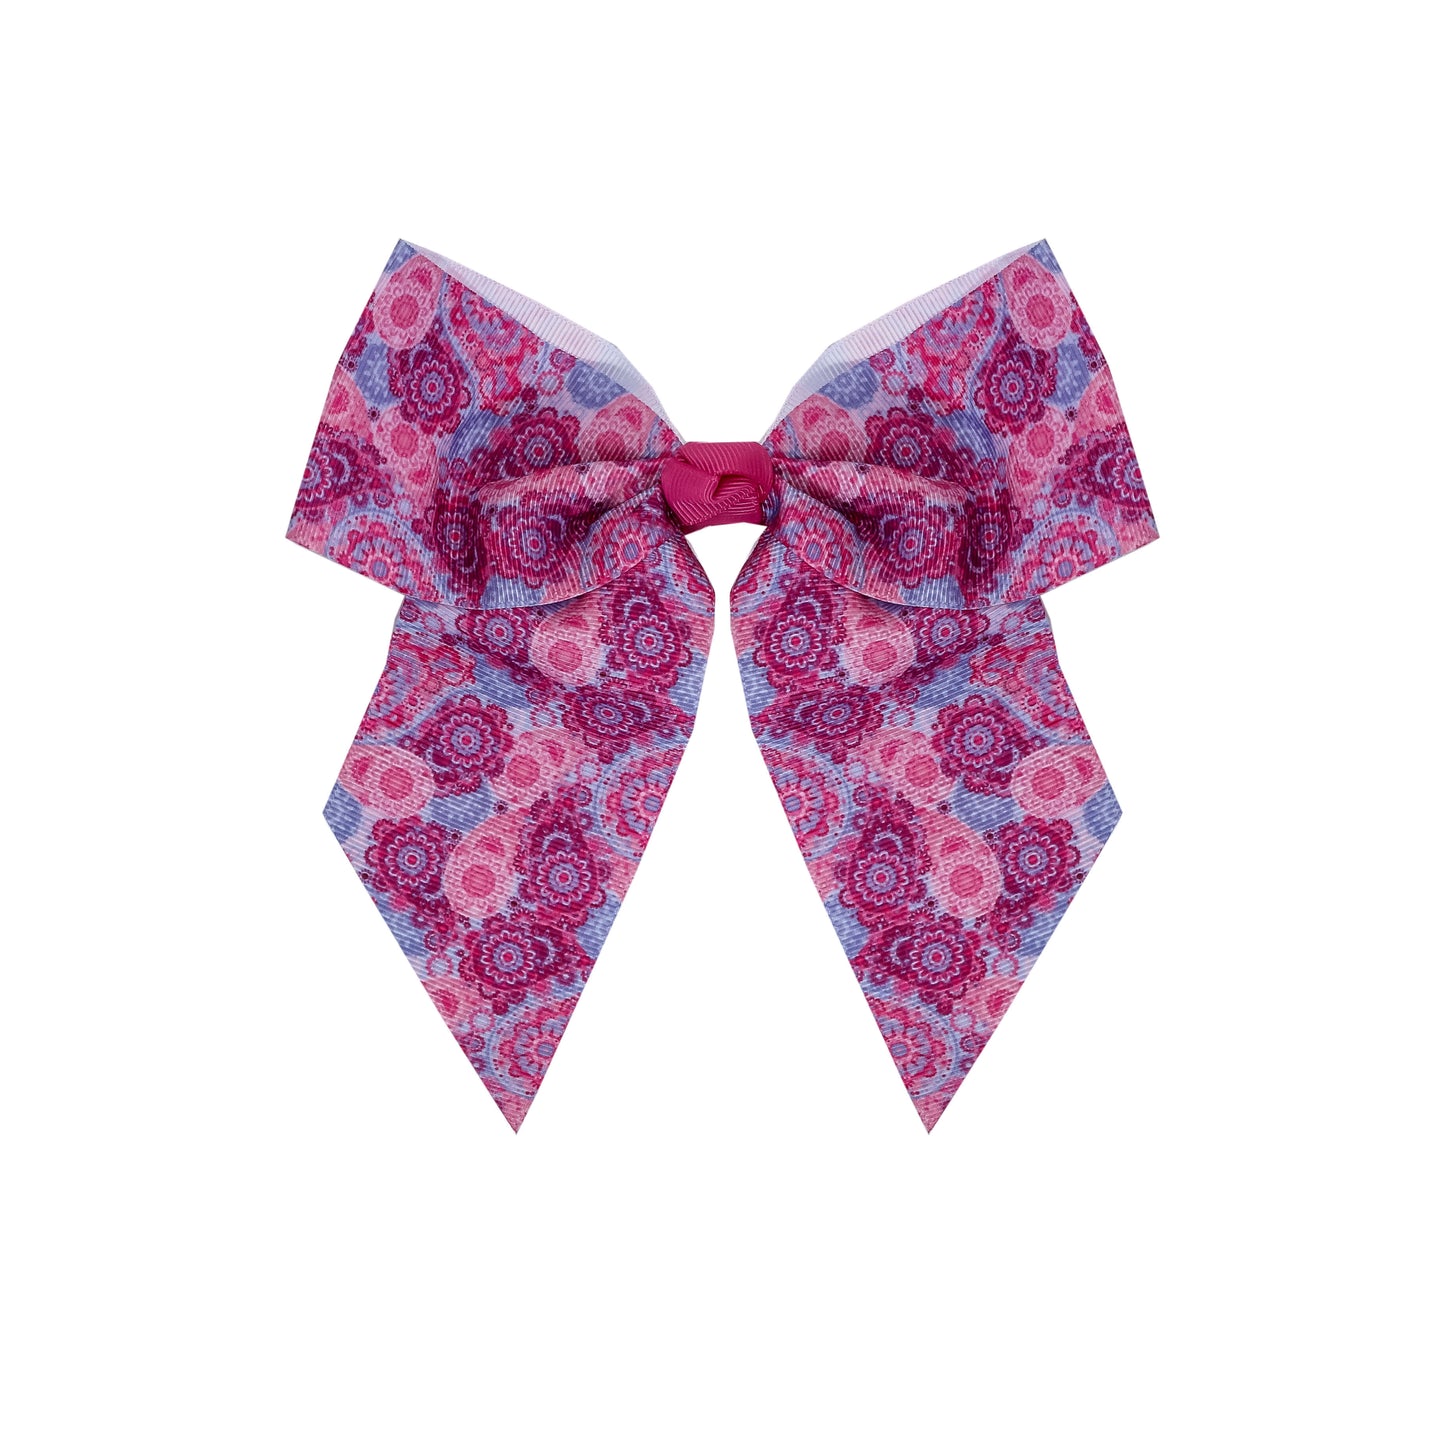 Pastry Slant Tail Print Bow in Paisley